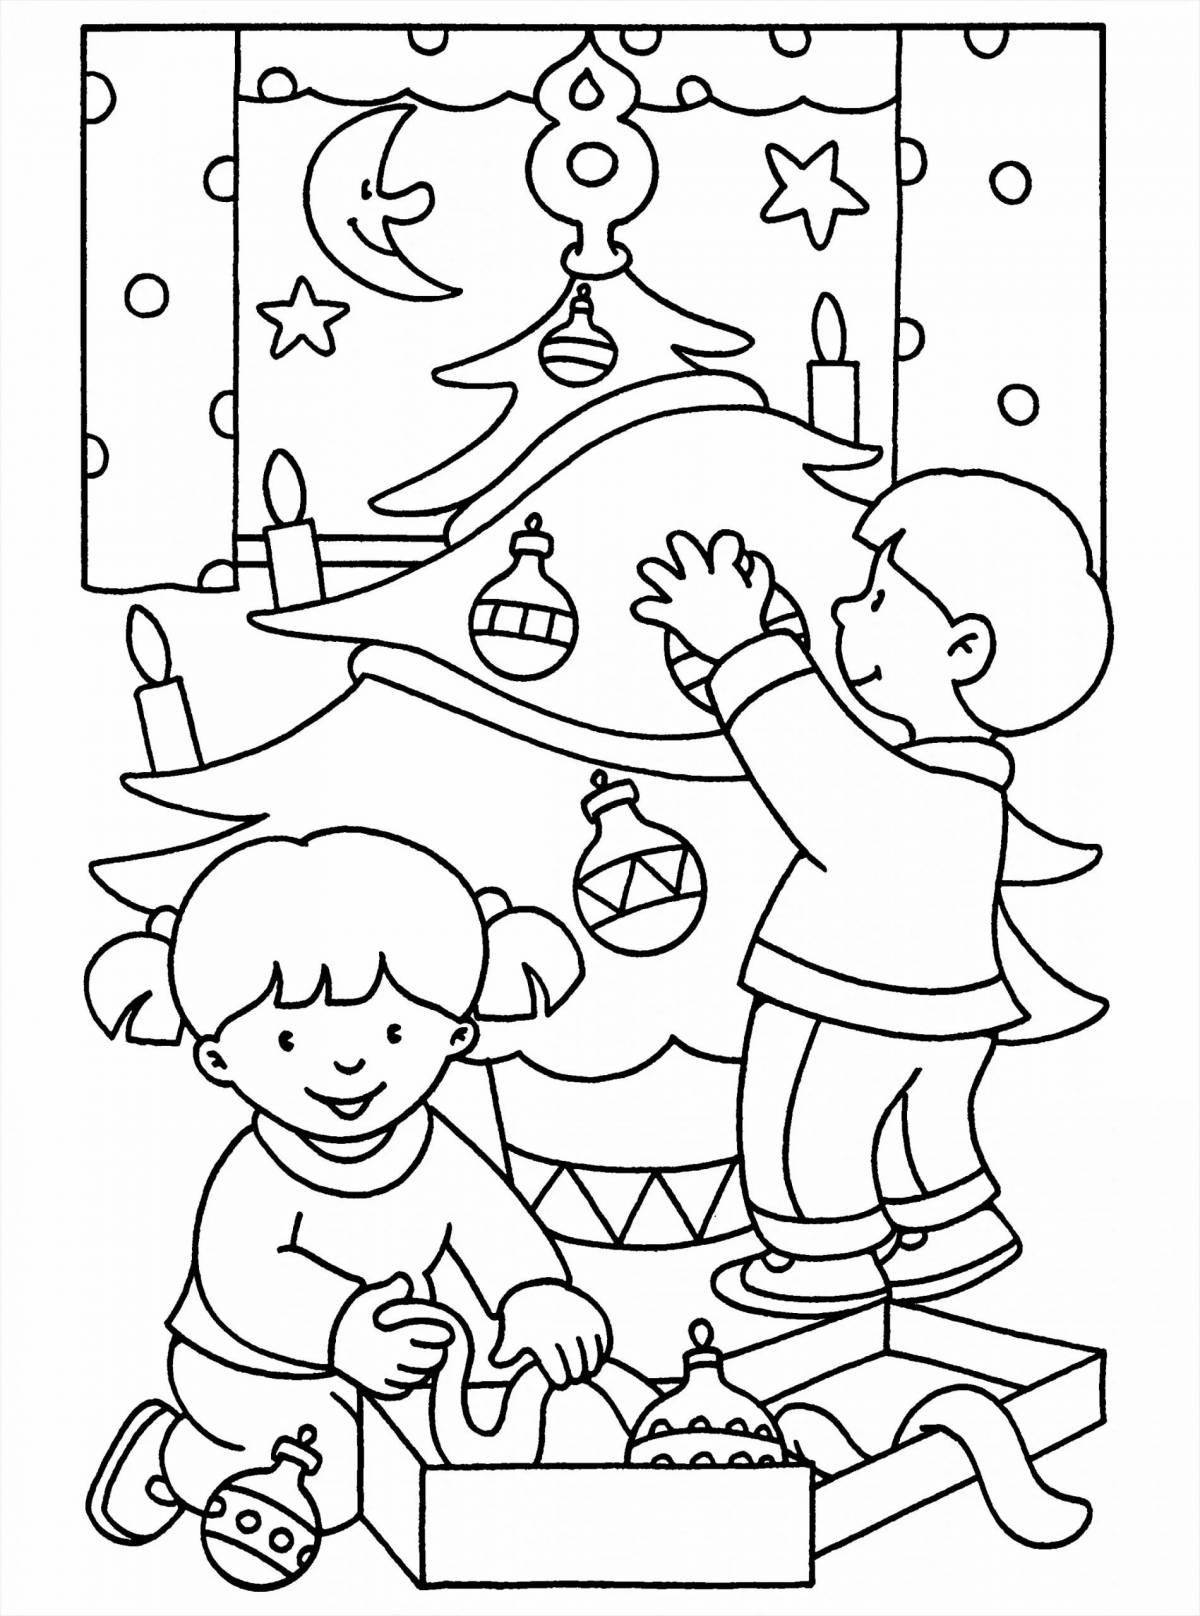 Bright Christmas coloring book for 5-6 year olds